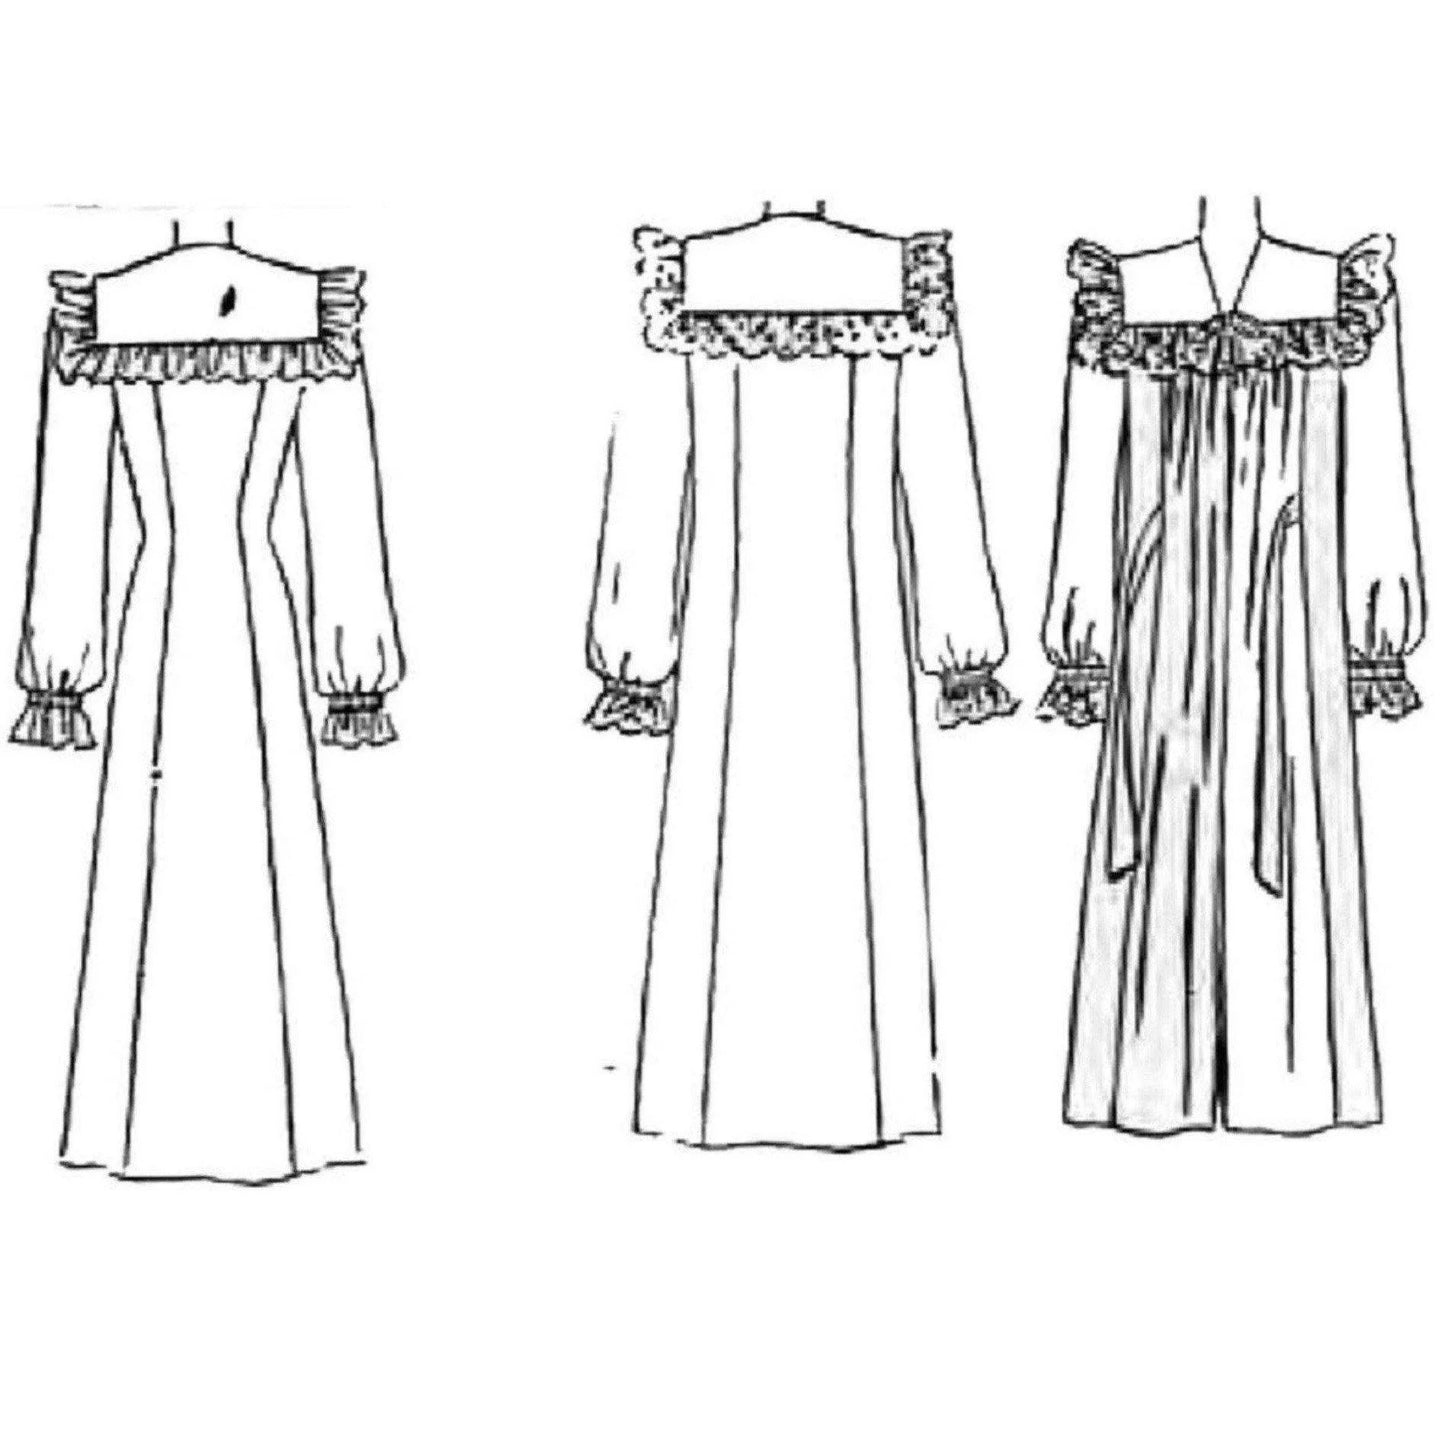 Line drawings of nightgowns